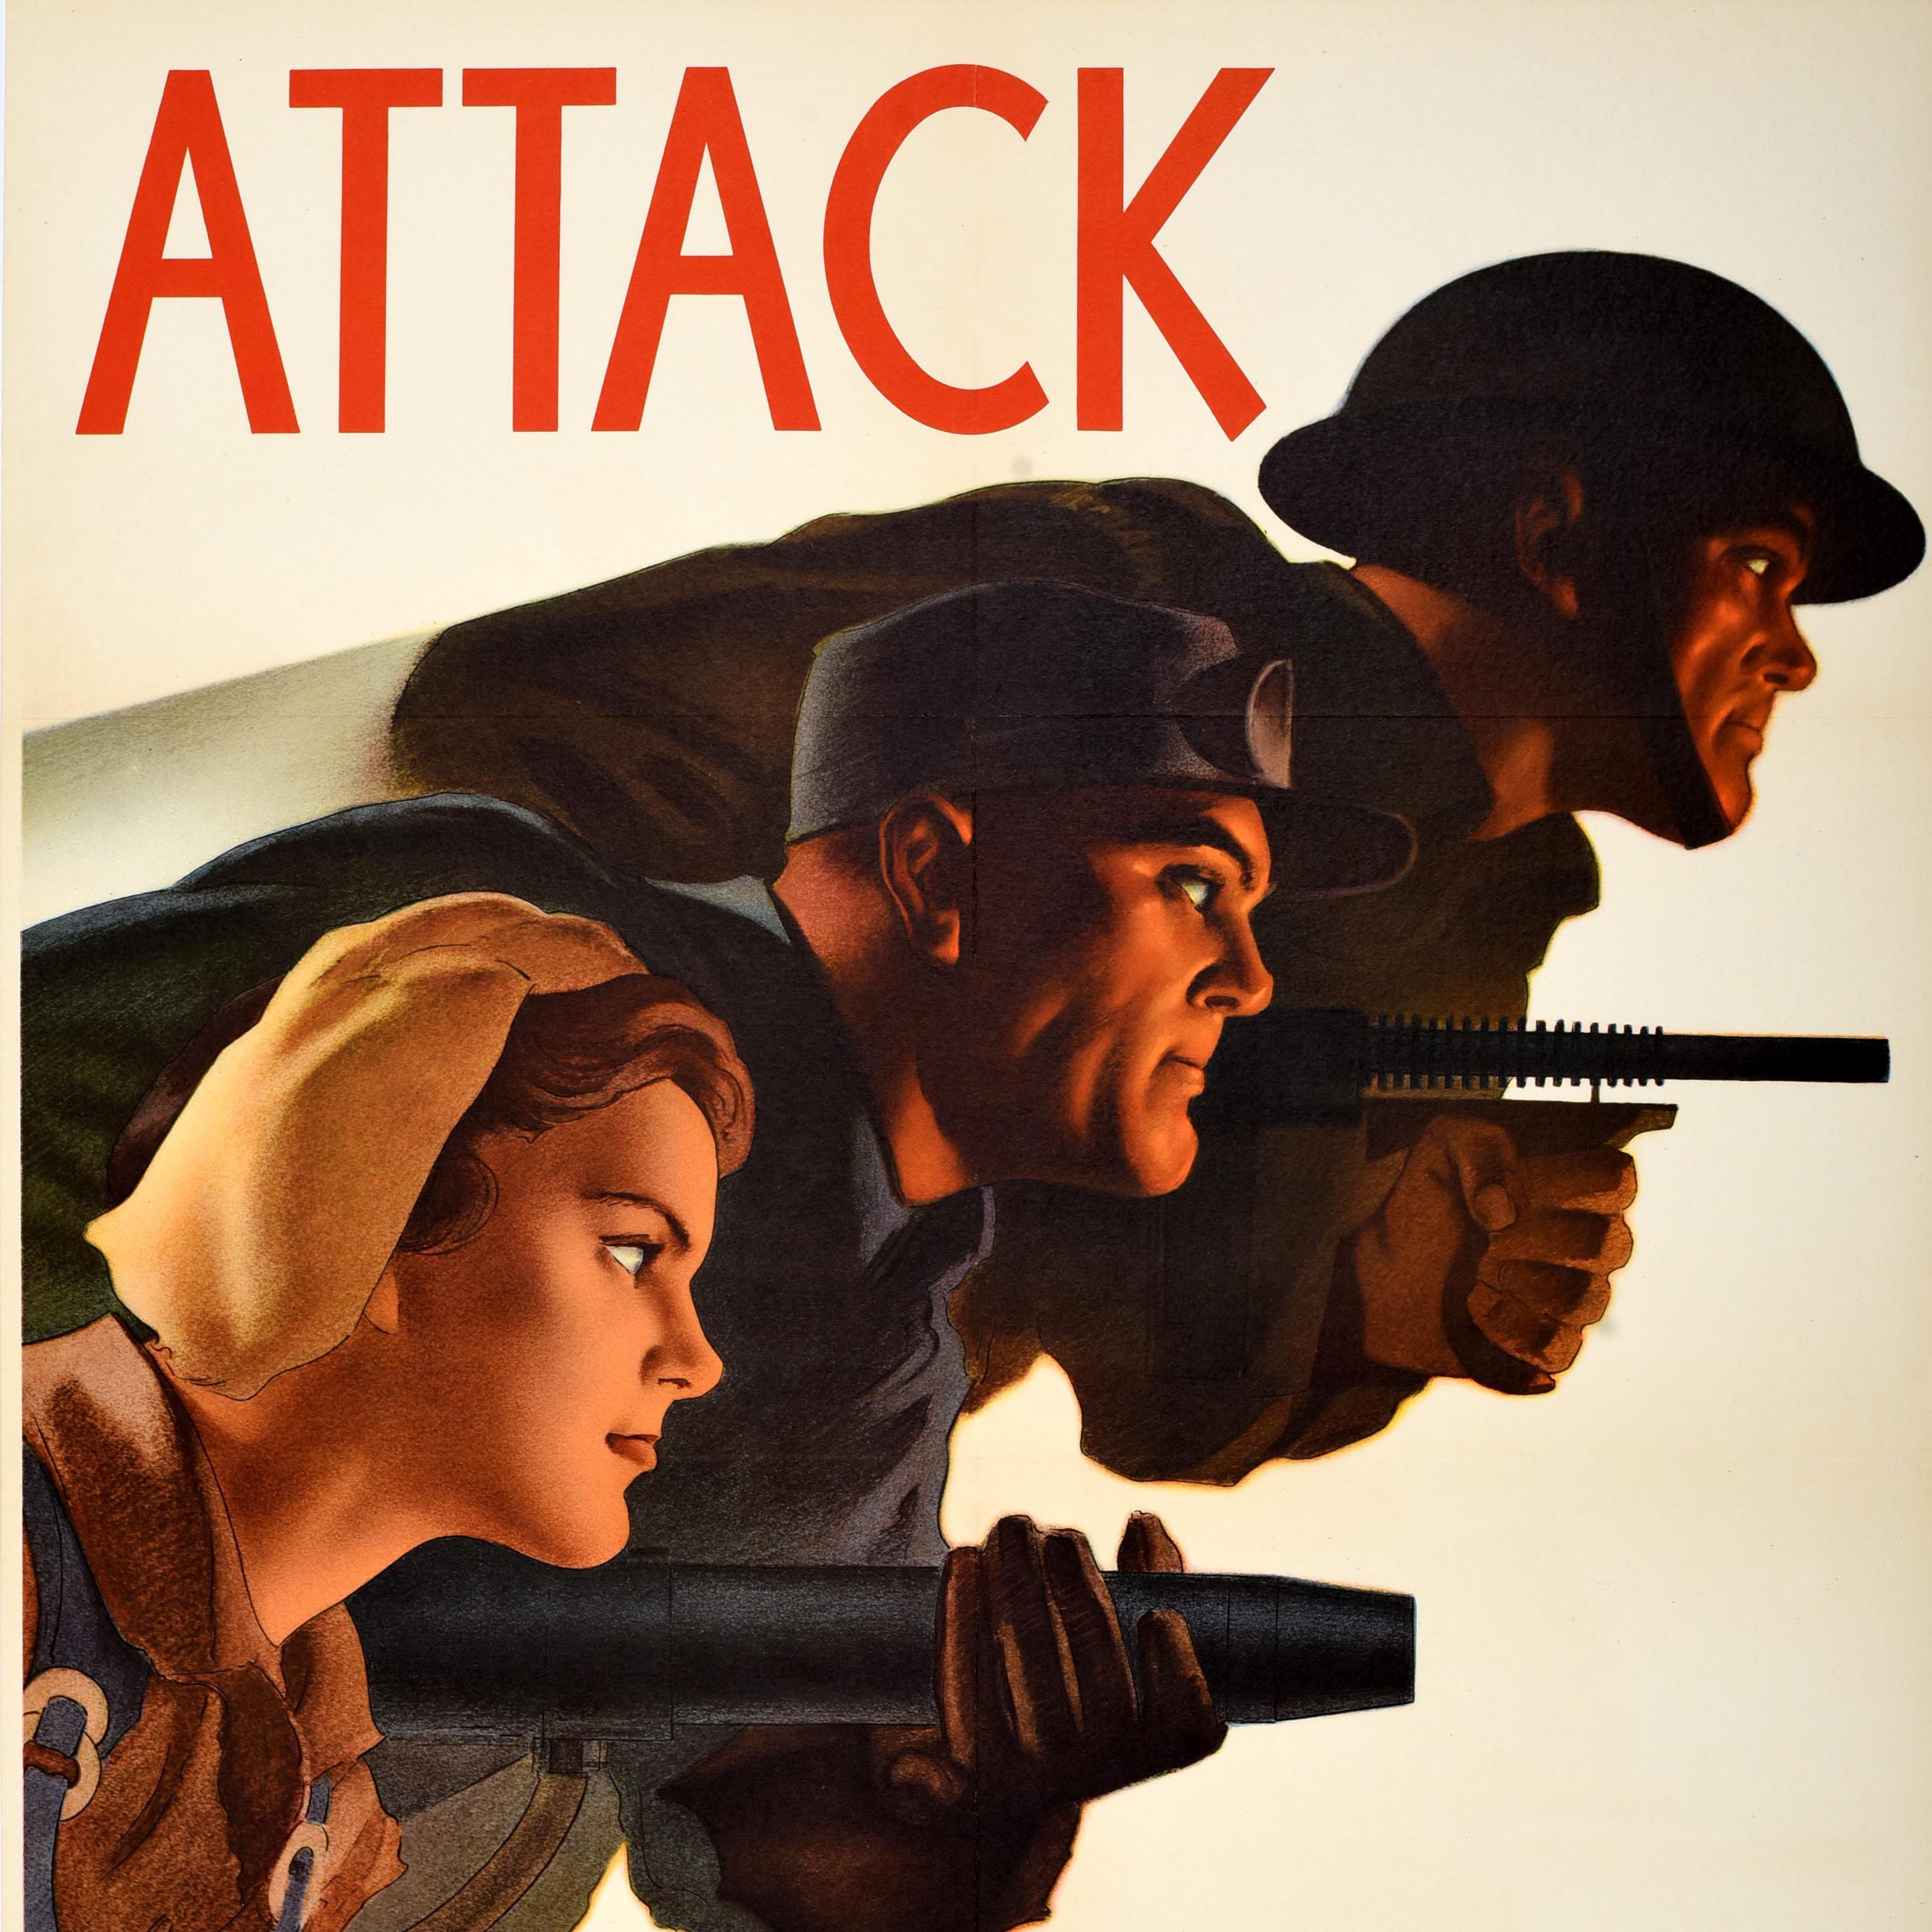 Canadian Original Vintage War Poster Attack On All Fronts WWII Canada Hubert Rogers For Sale